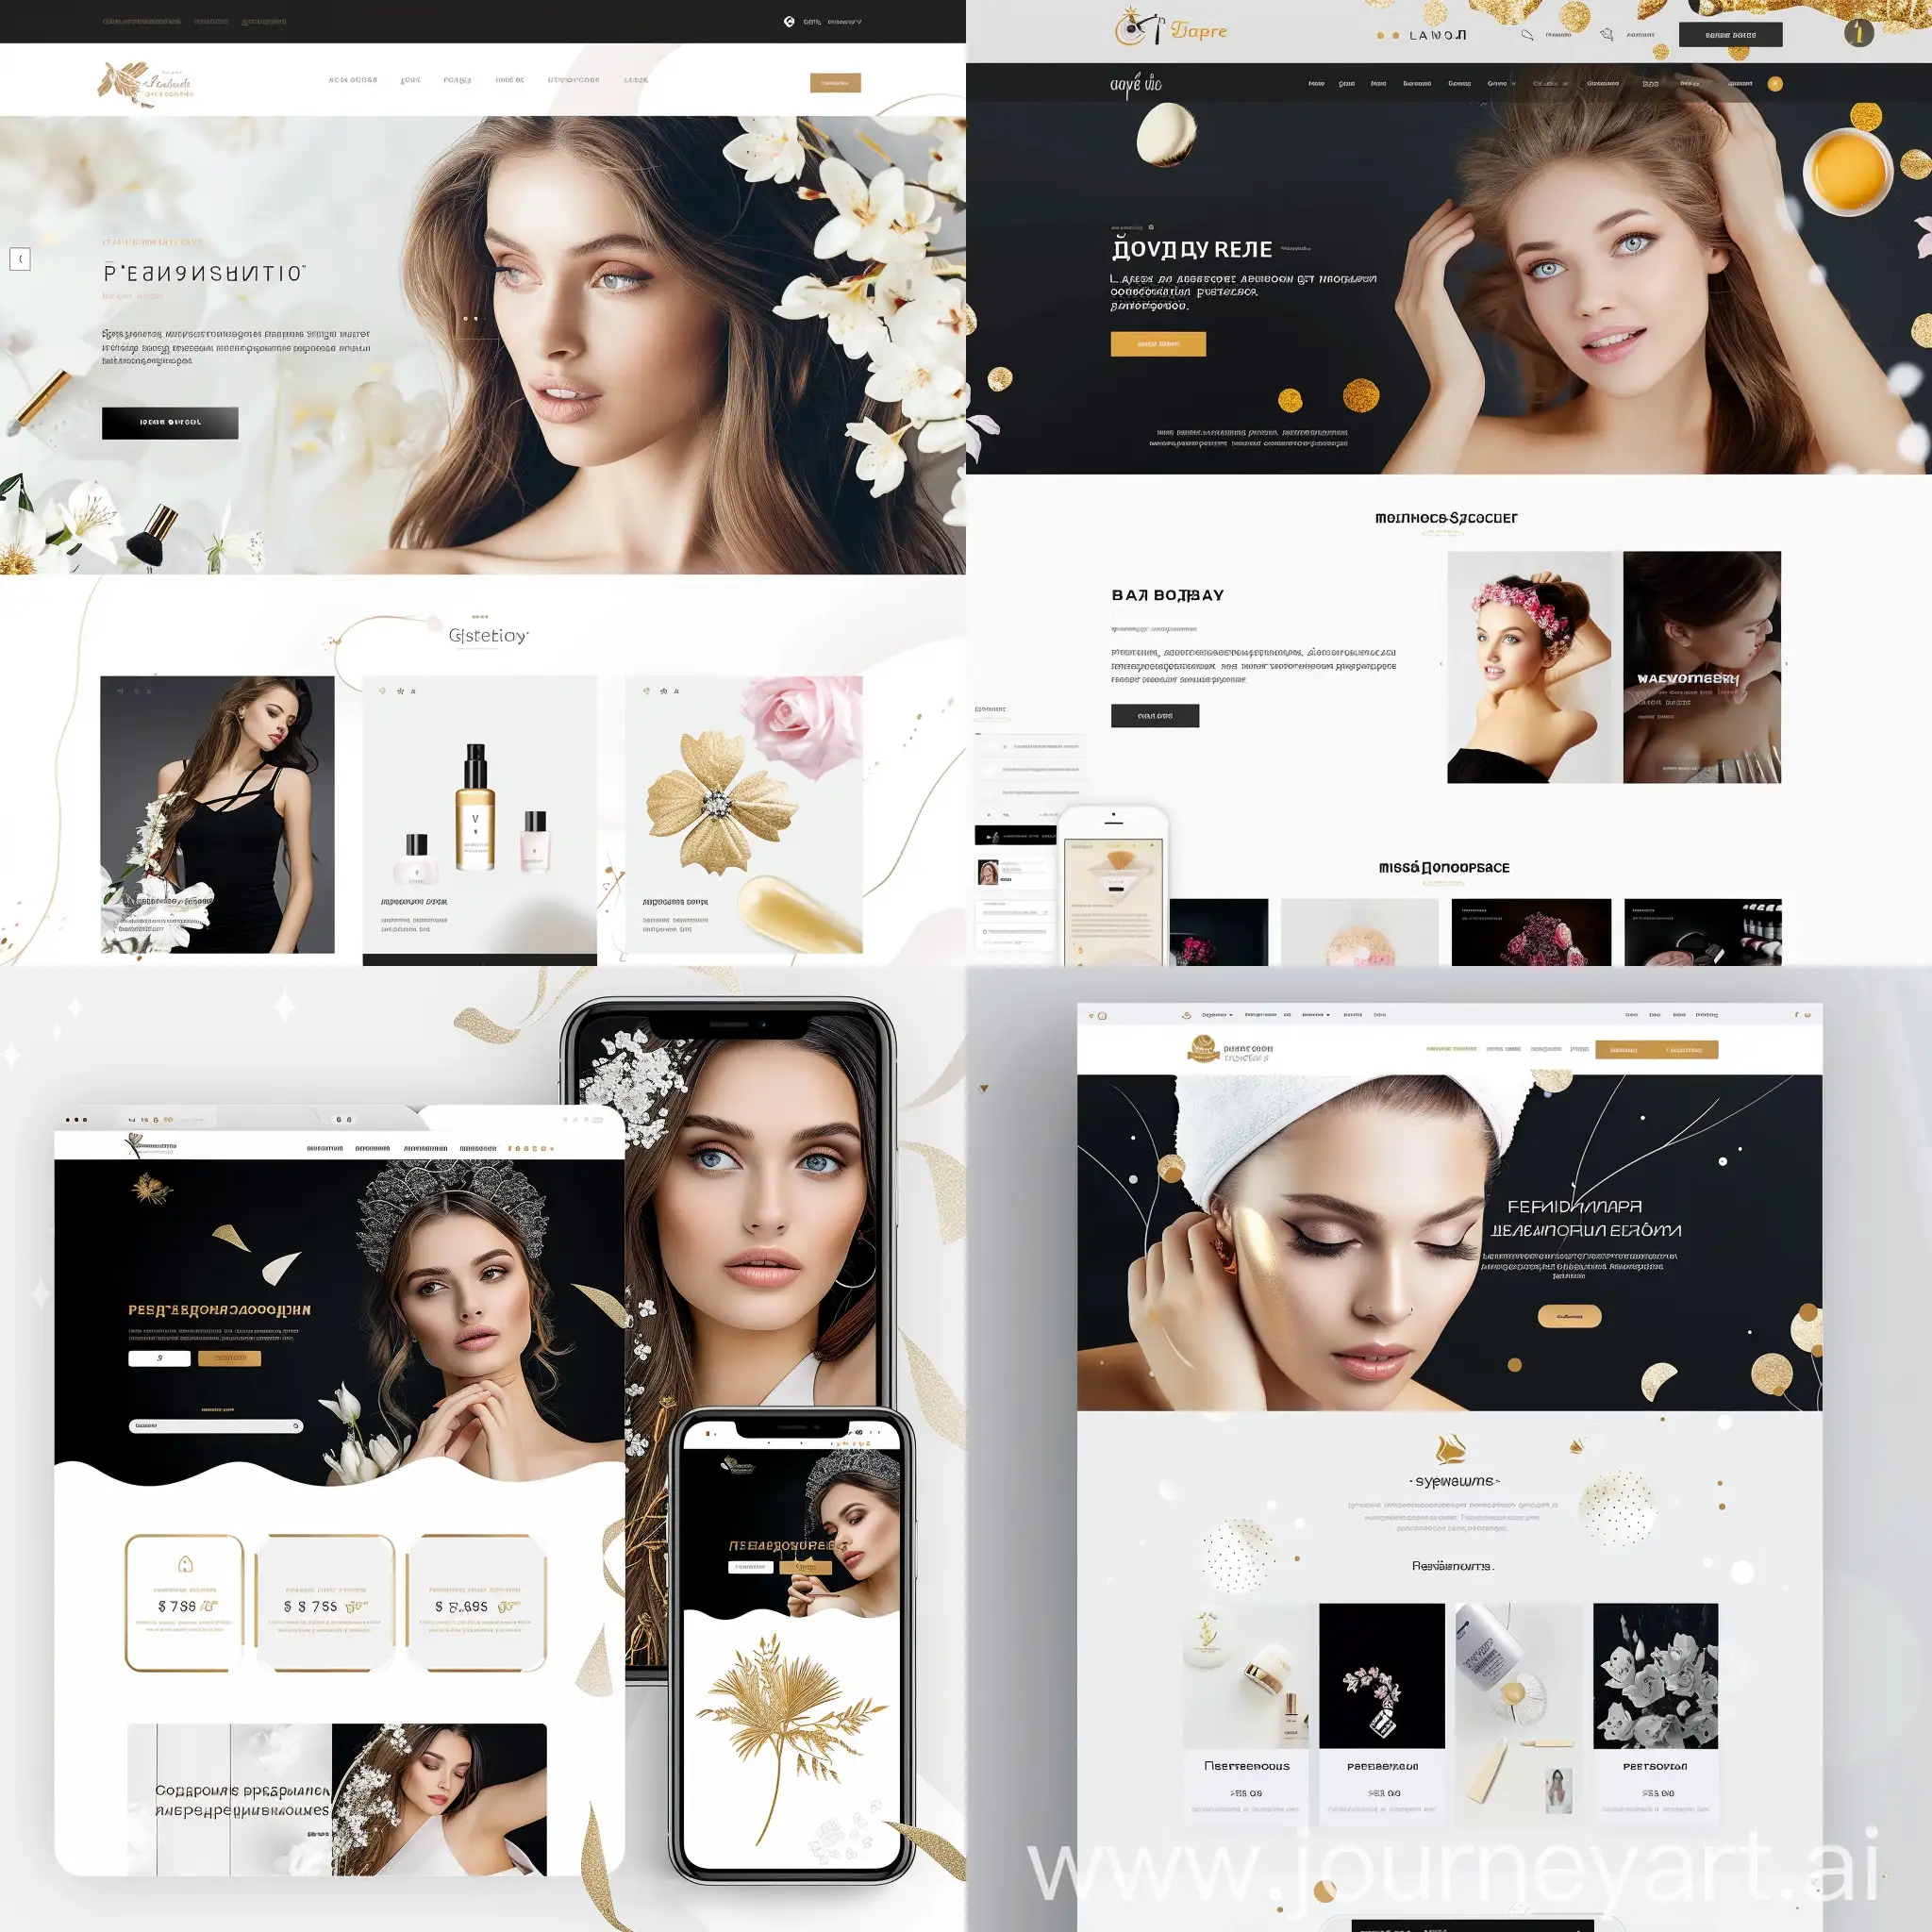 Elegant-Beauty-Studio-Website-Design-in-White-Black-and-Gold-with-UserFriendly-Interface